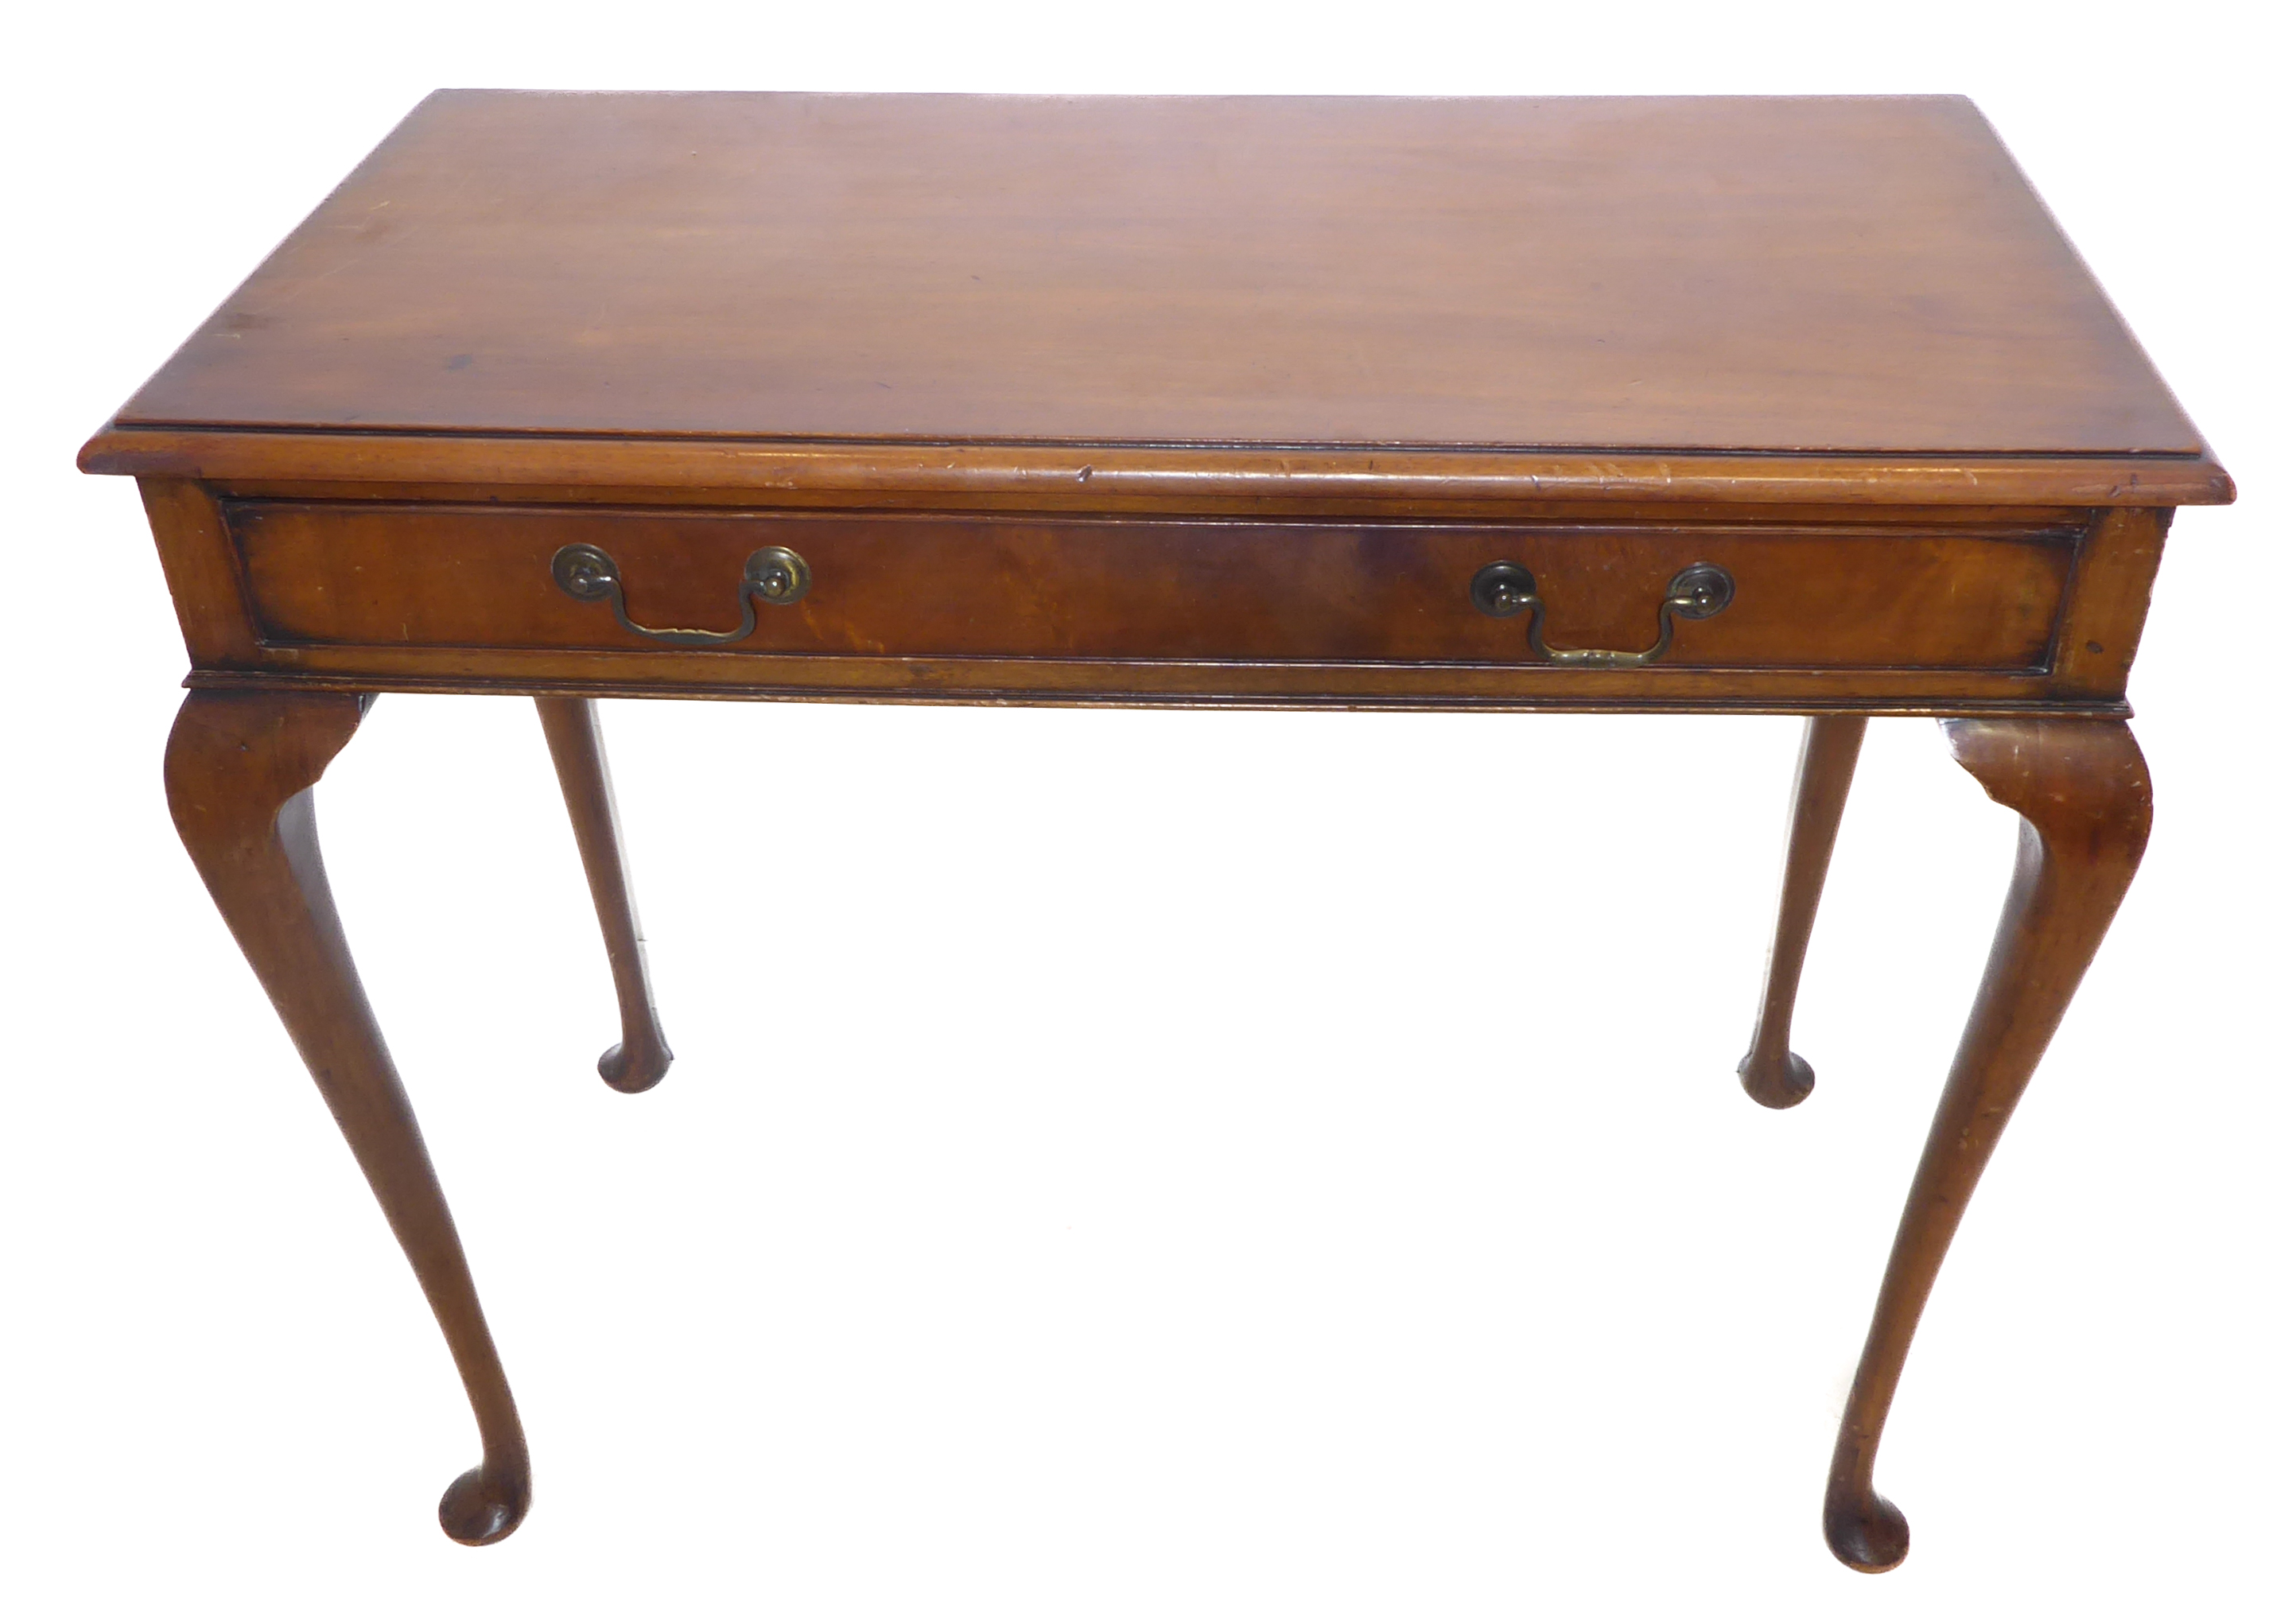 An early 20th century mahogany side table in Georgian-style – the thumbnail moulded top above a - Image 2 of 4